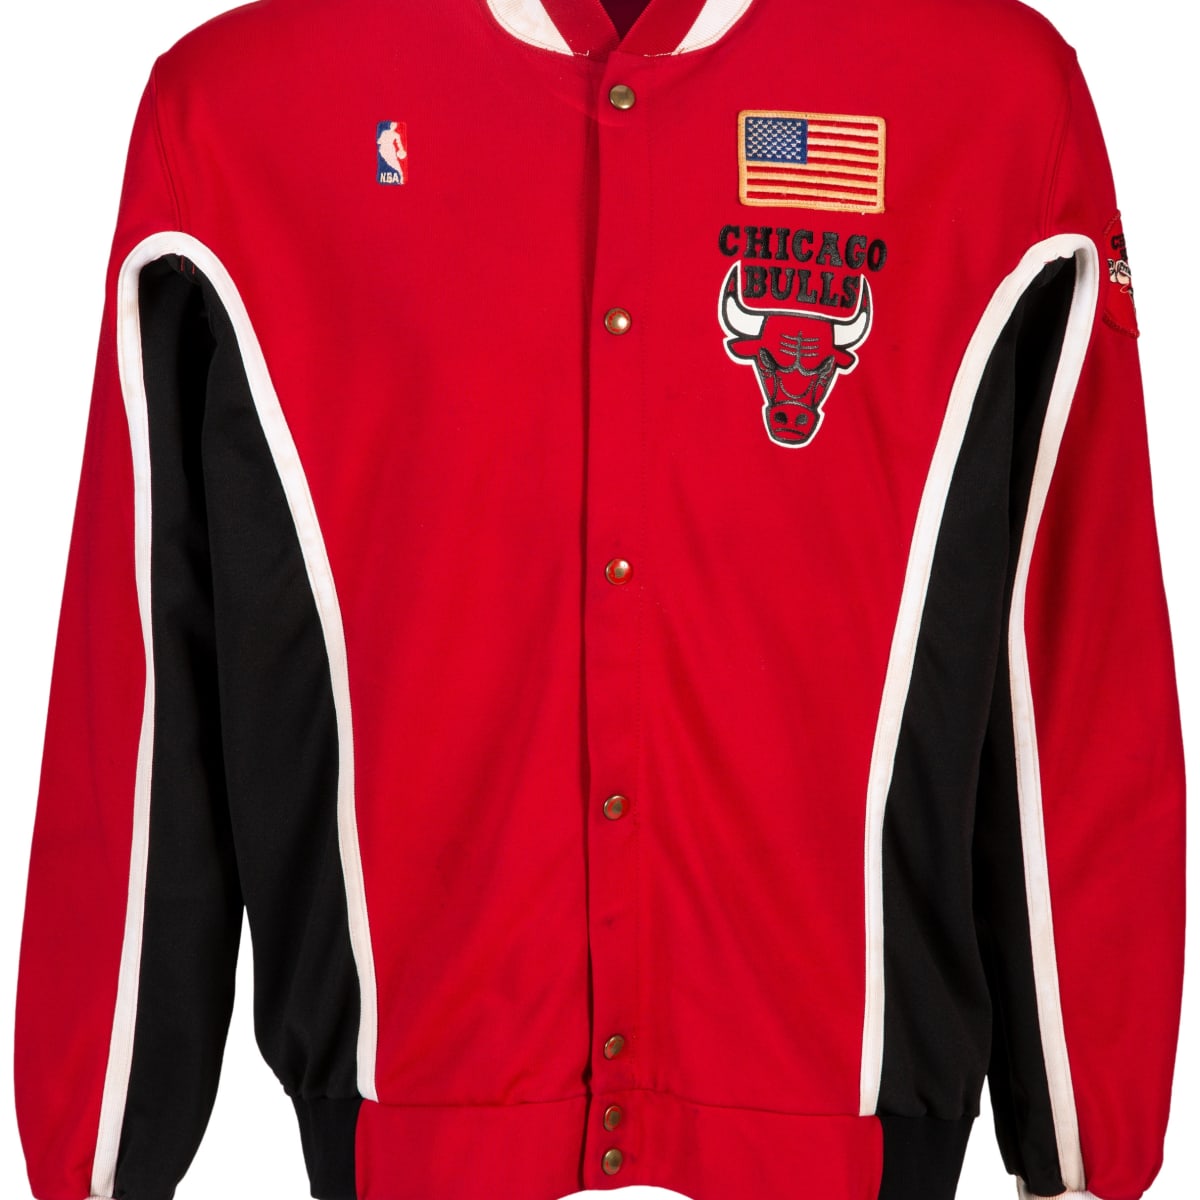 Chicago Bulls Warm Up for sale